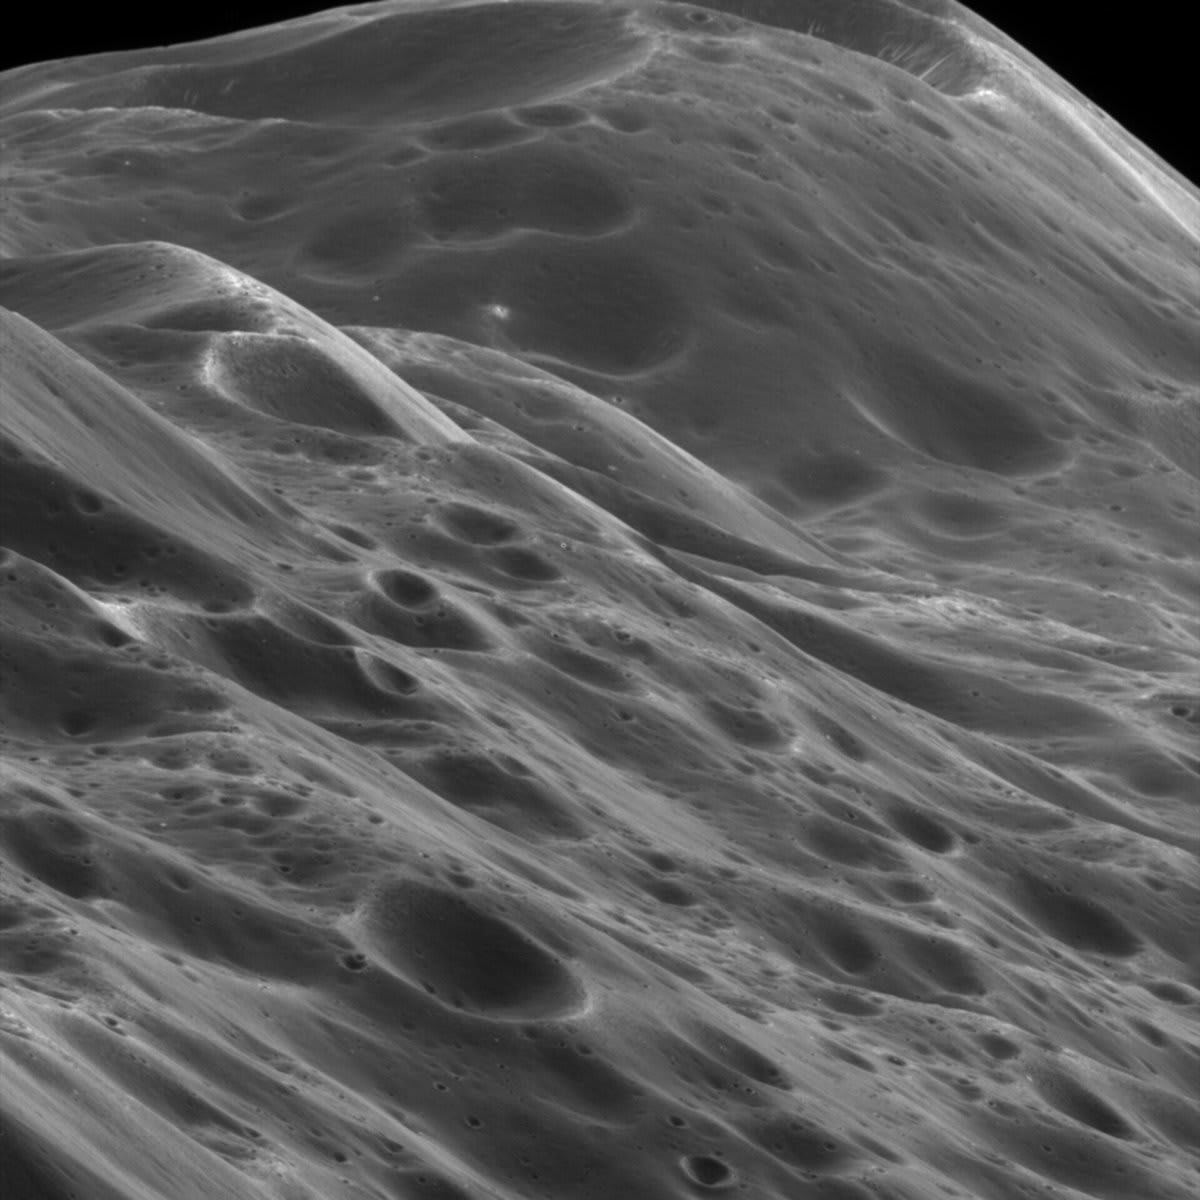 OTD 10 September 2007, the NASA/ESA/ASI Cassini spacecraft took this stunning close-up of saturnian moon #Iapetus. This mountainous terrain reaches up to 10 km in height along the unique equatorial ridge of the moon 👉https://t.co/GMRKsxpDvU